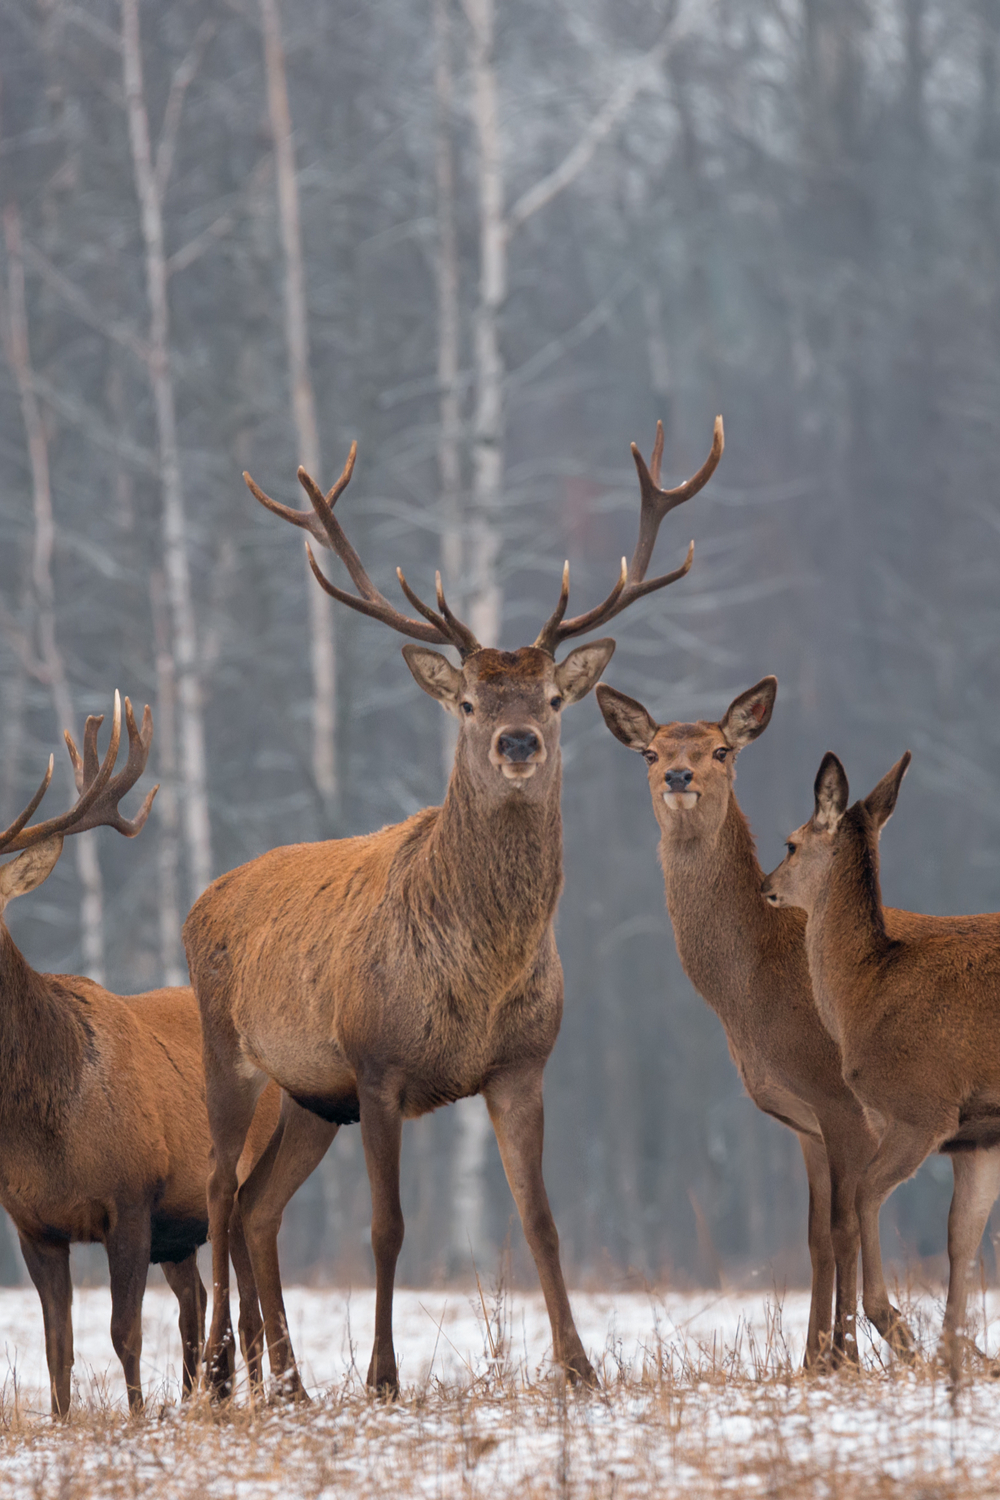 Deer Colors and Their Meaning In Dreams